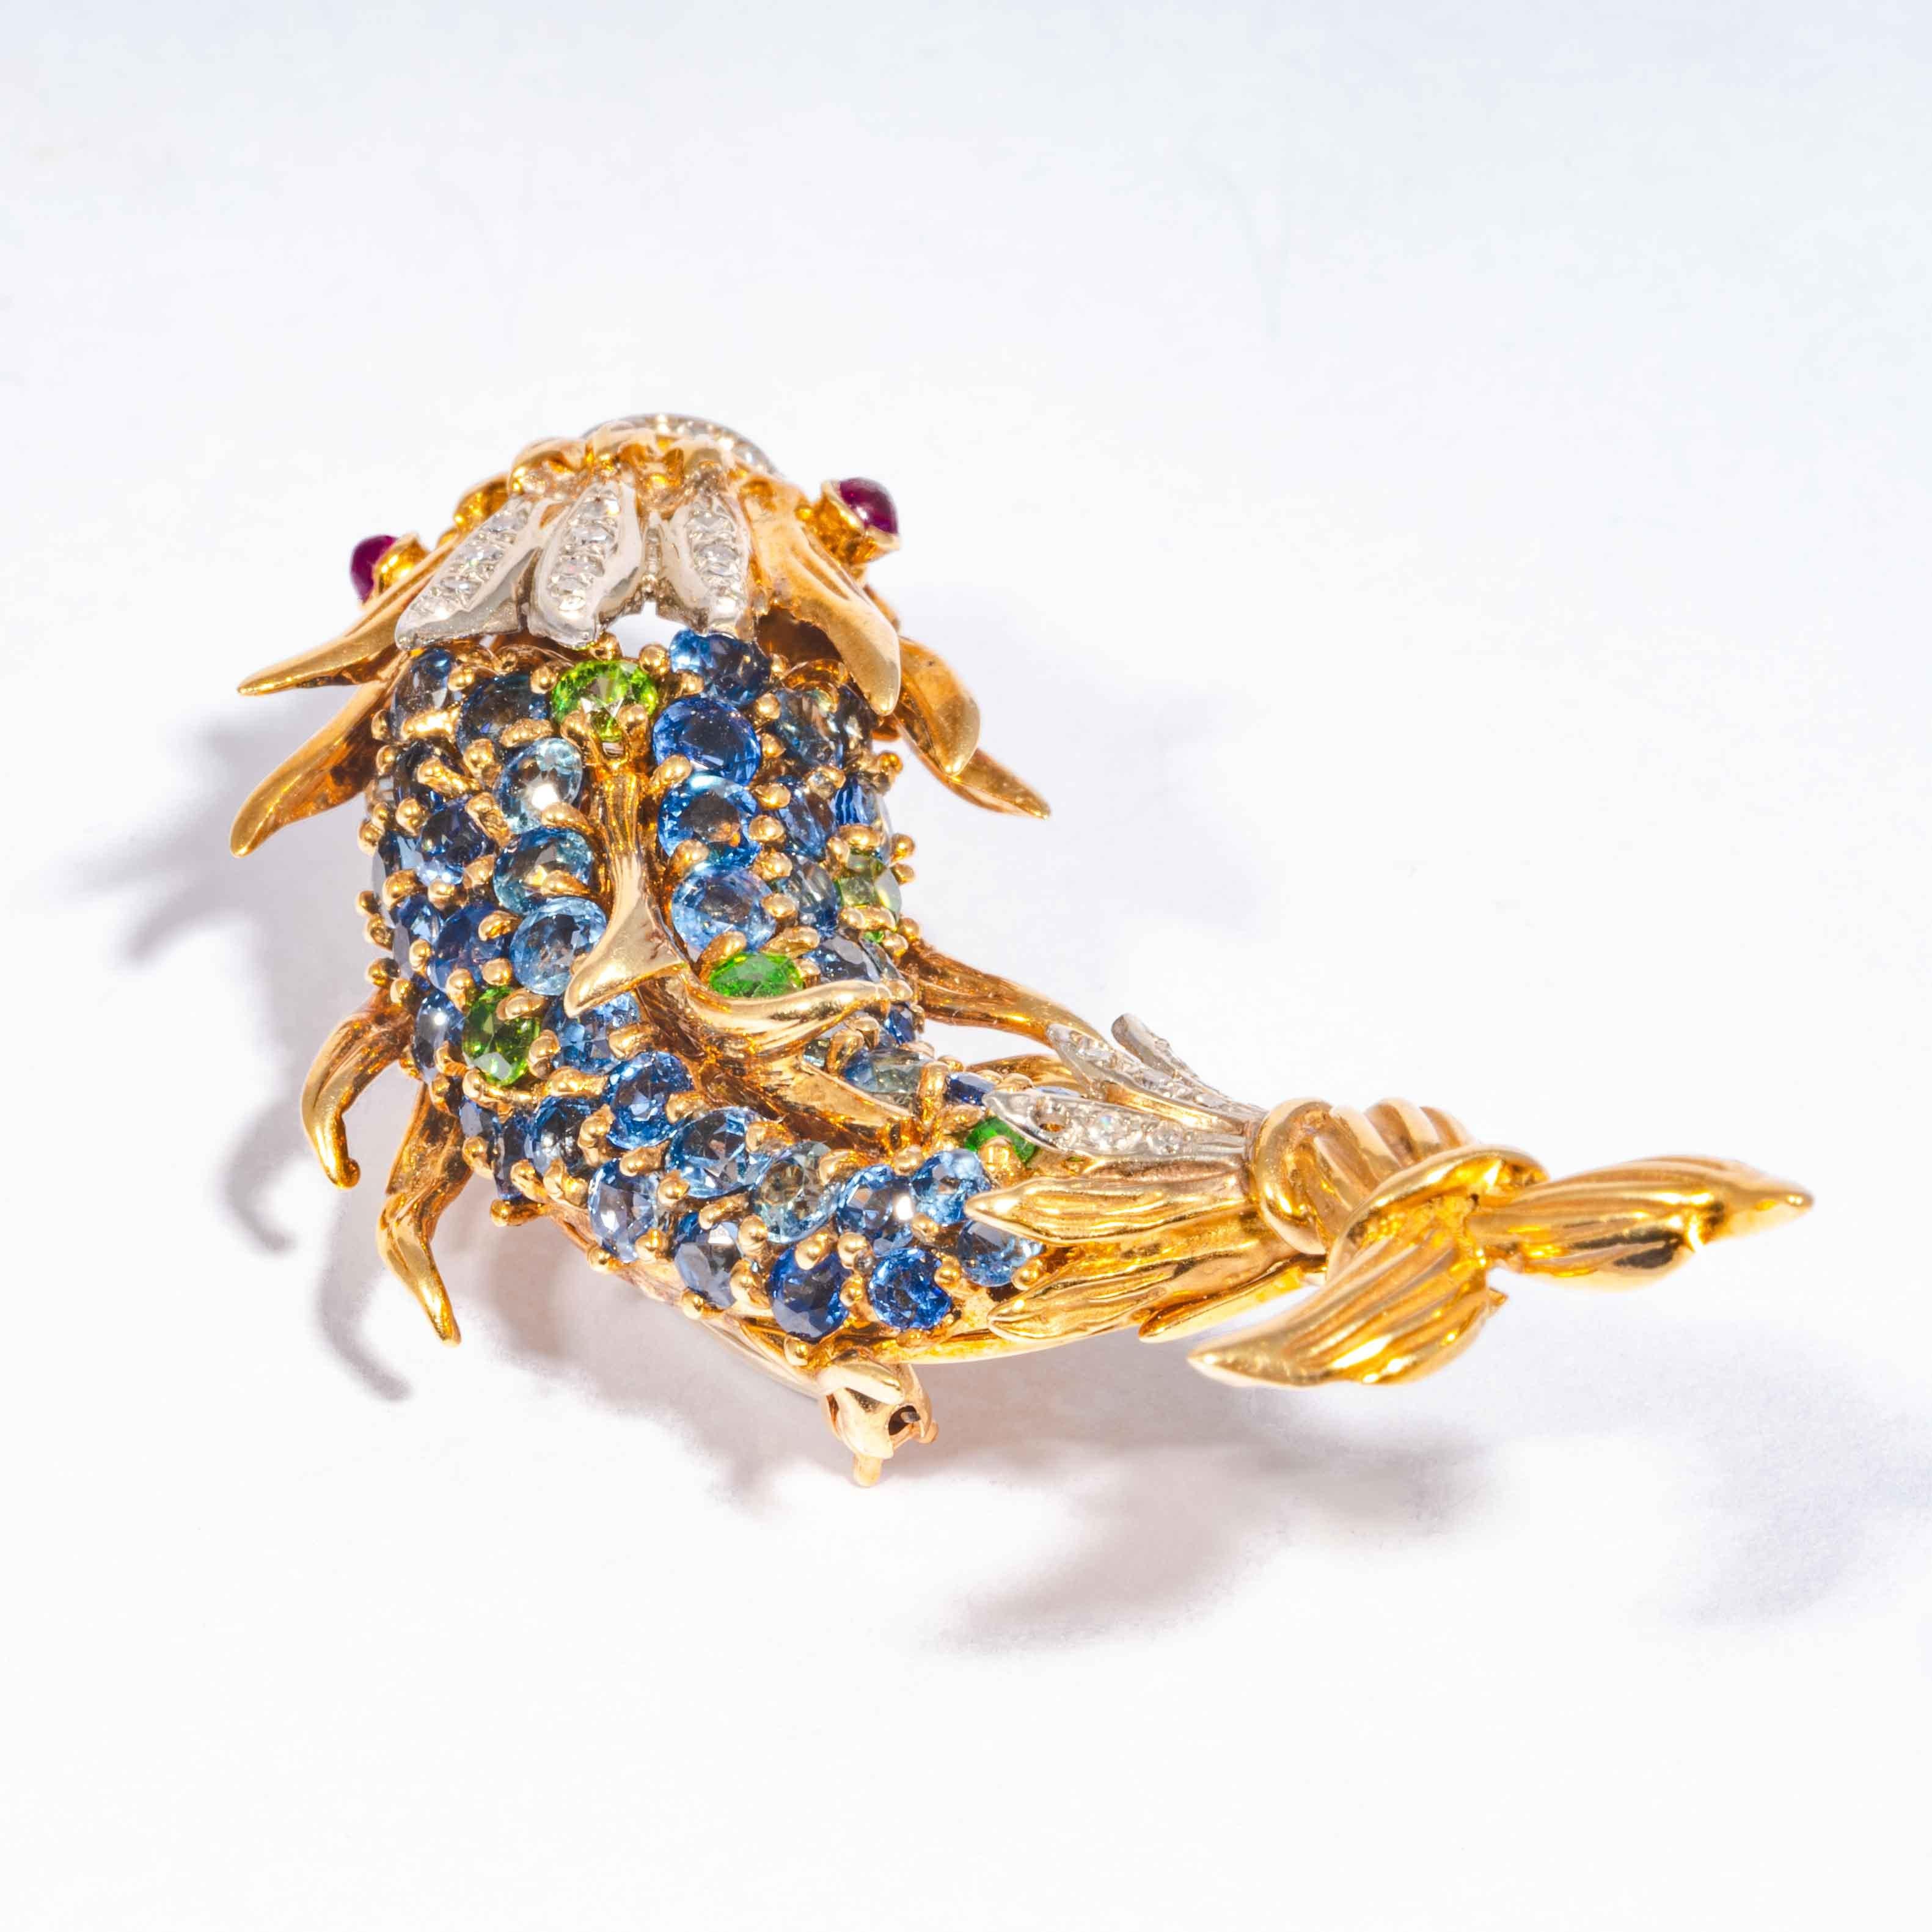 Brilliant Cut Sapphire and Diamond Fish Clip Brooch by Jean Schlumberger, Tiffany & Co.